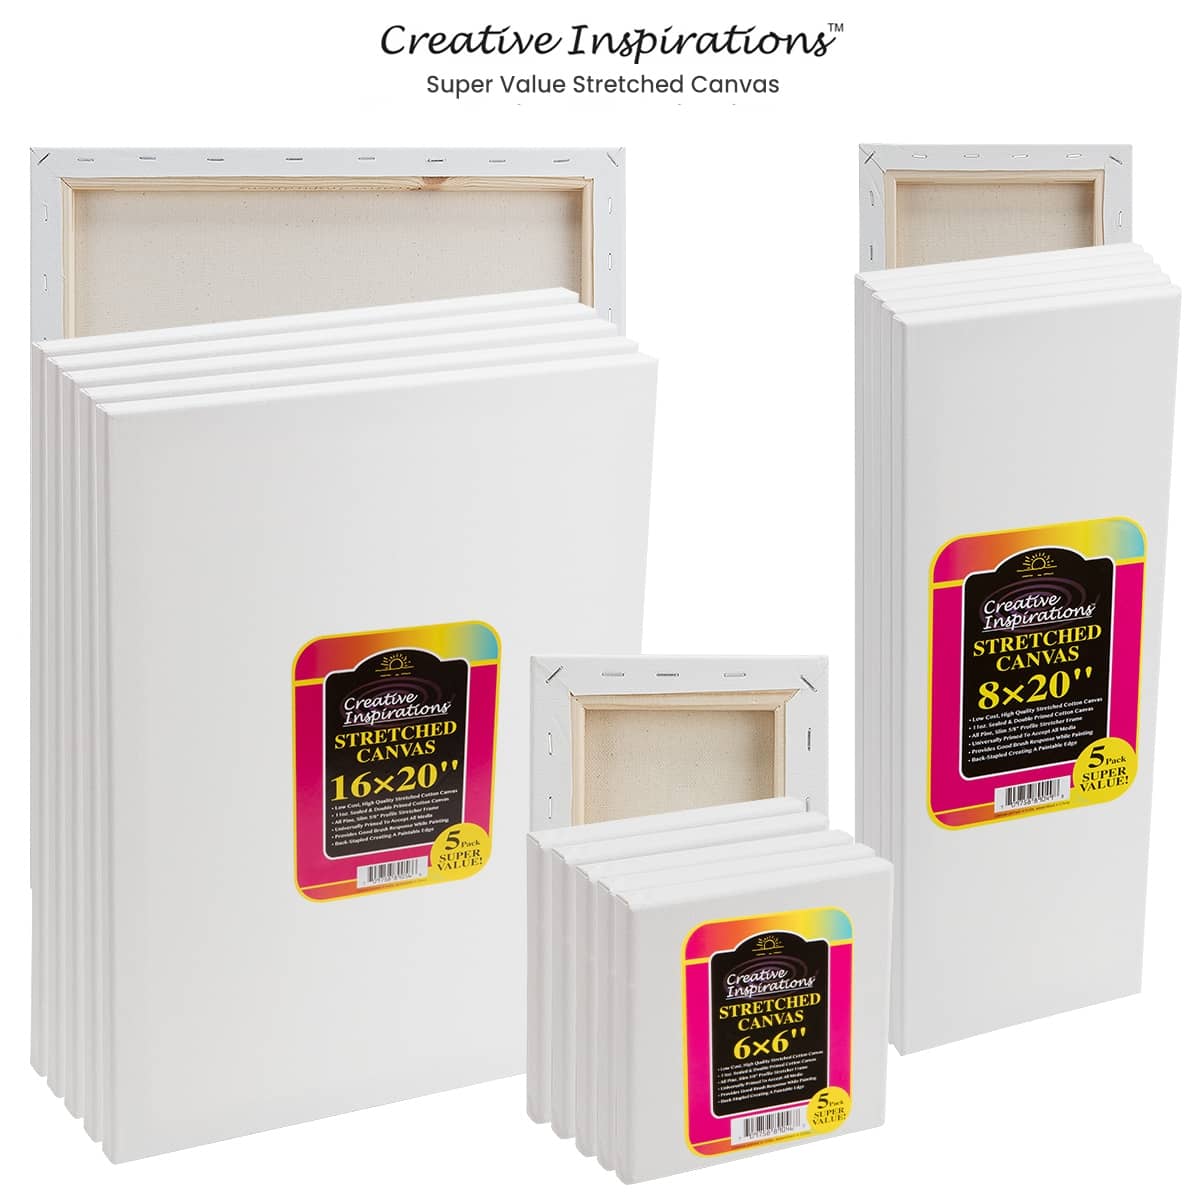 Creative Inspirations Stretched Canvas 5-Pack